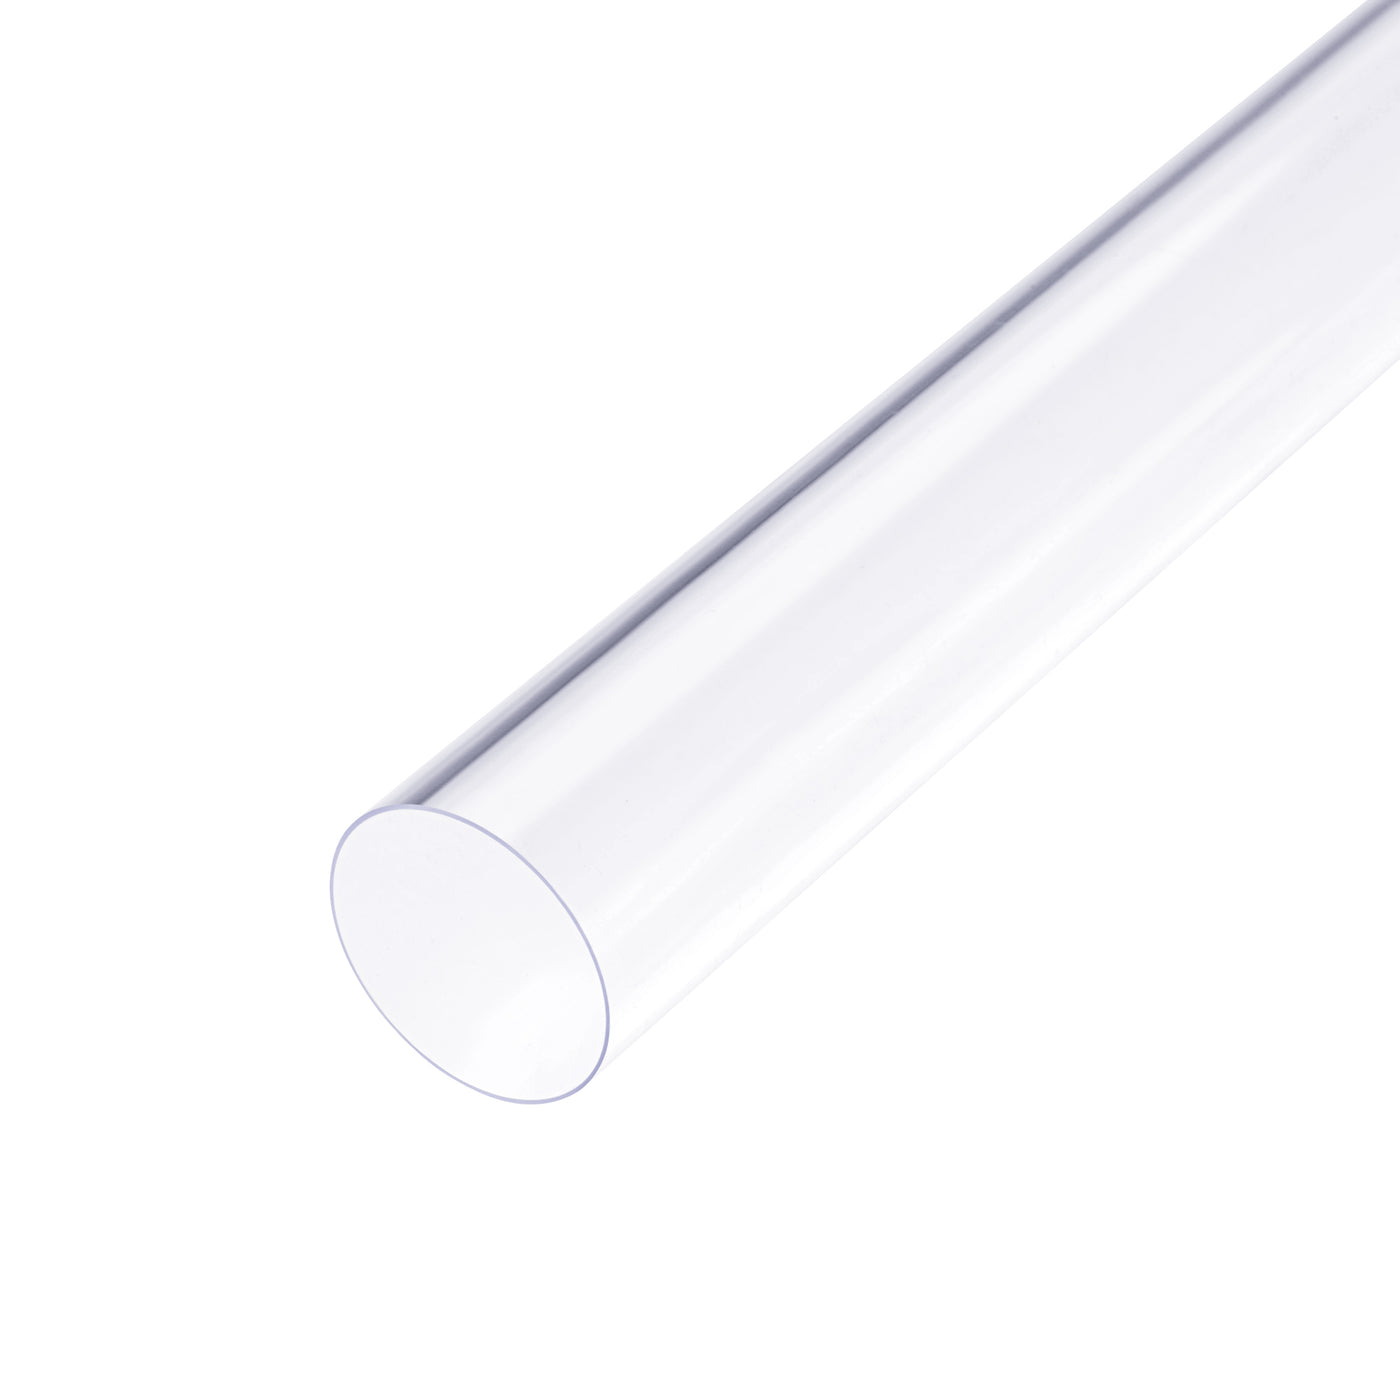 Uxcell Uxcell 3pcs Clear Rigid PVC Pipe 20mm ID x 21mm x 1.5ft, 0.02" Wall Round Tube Tubing